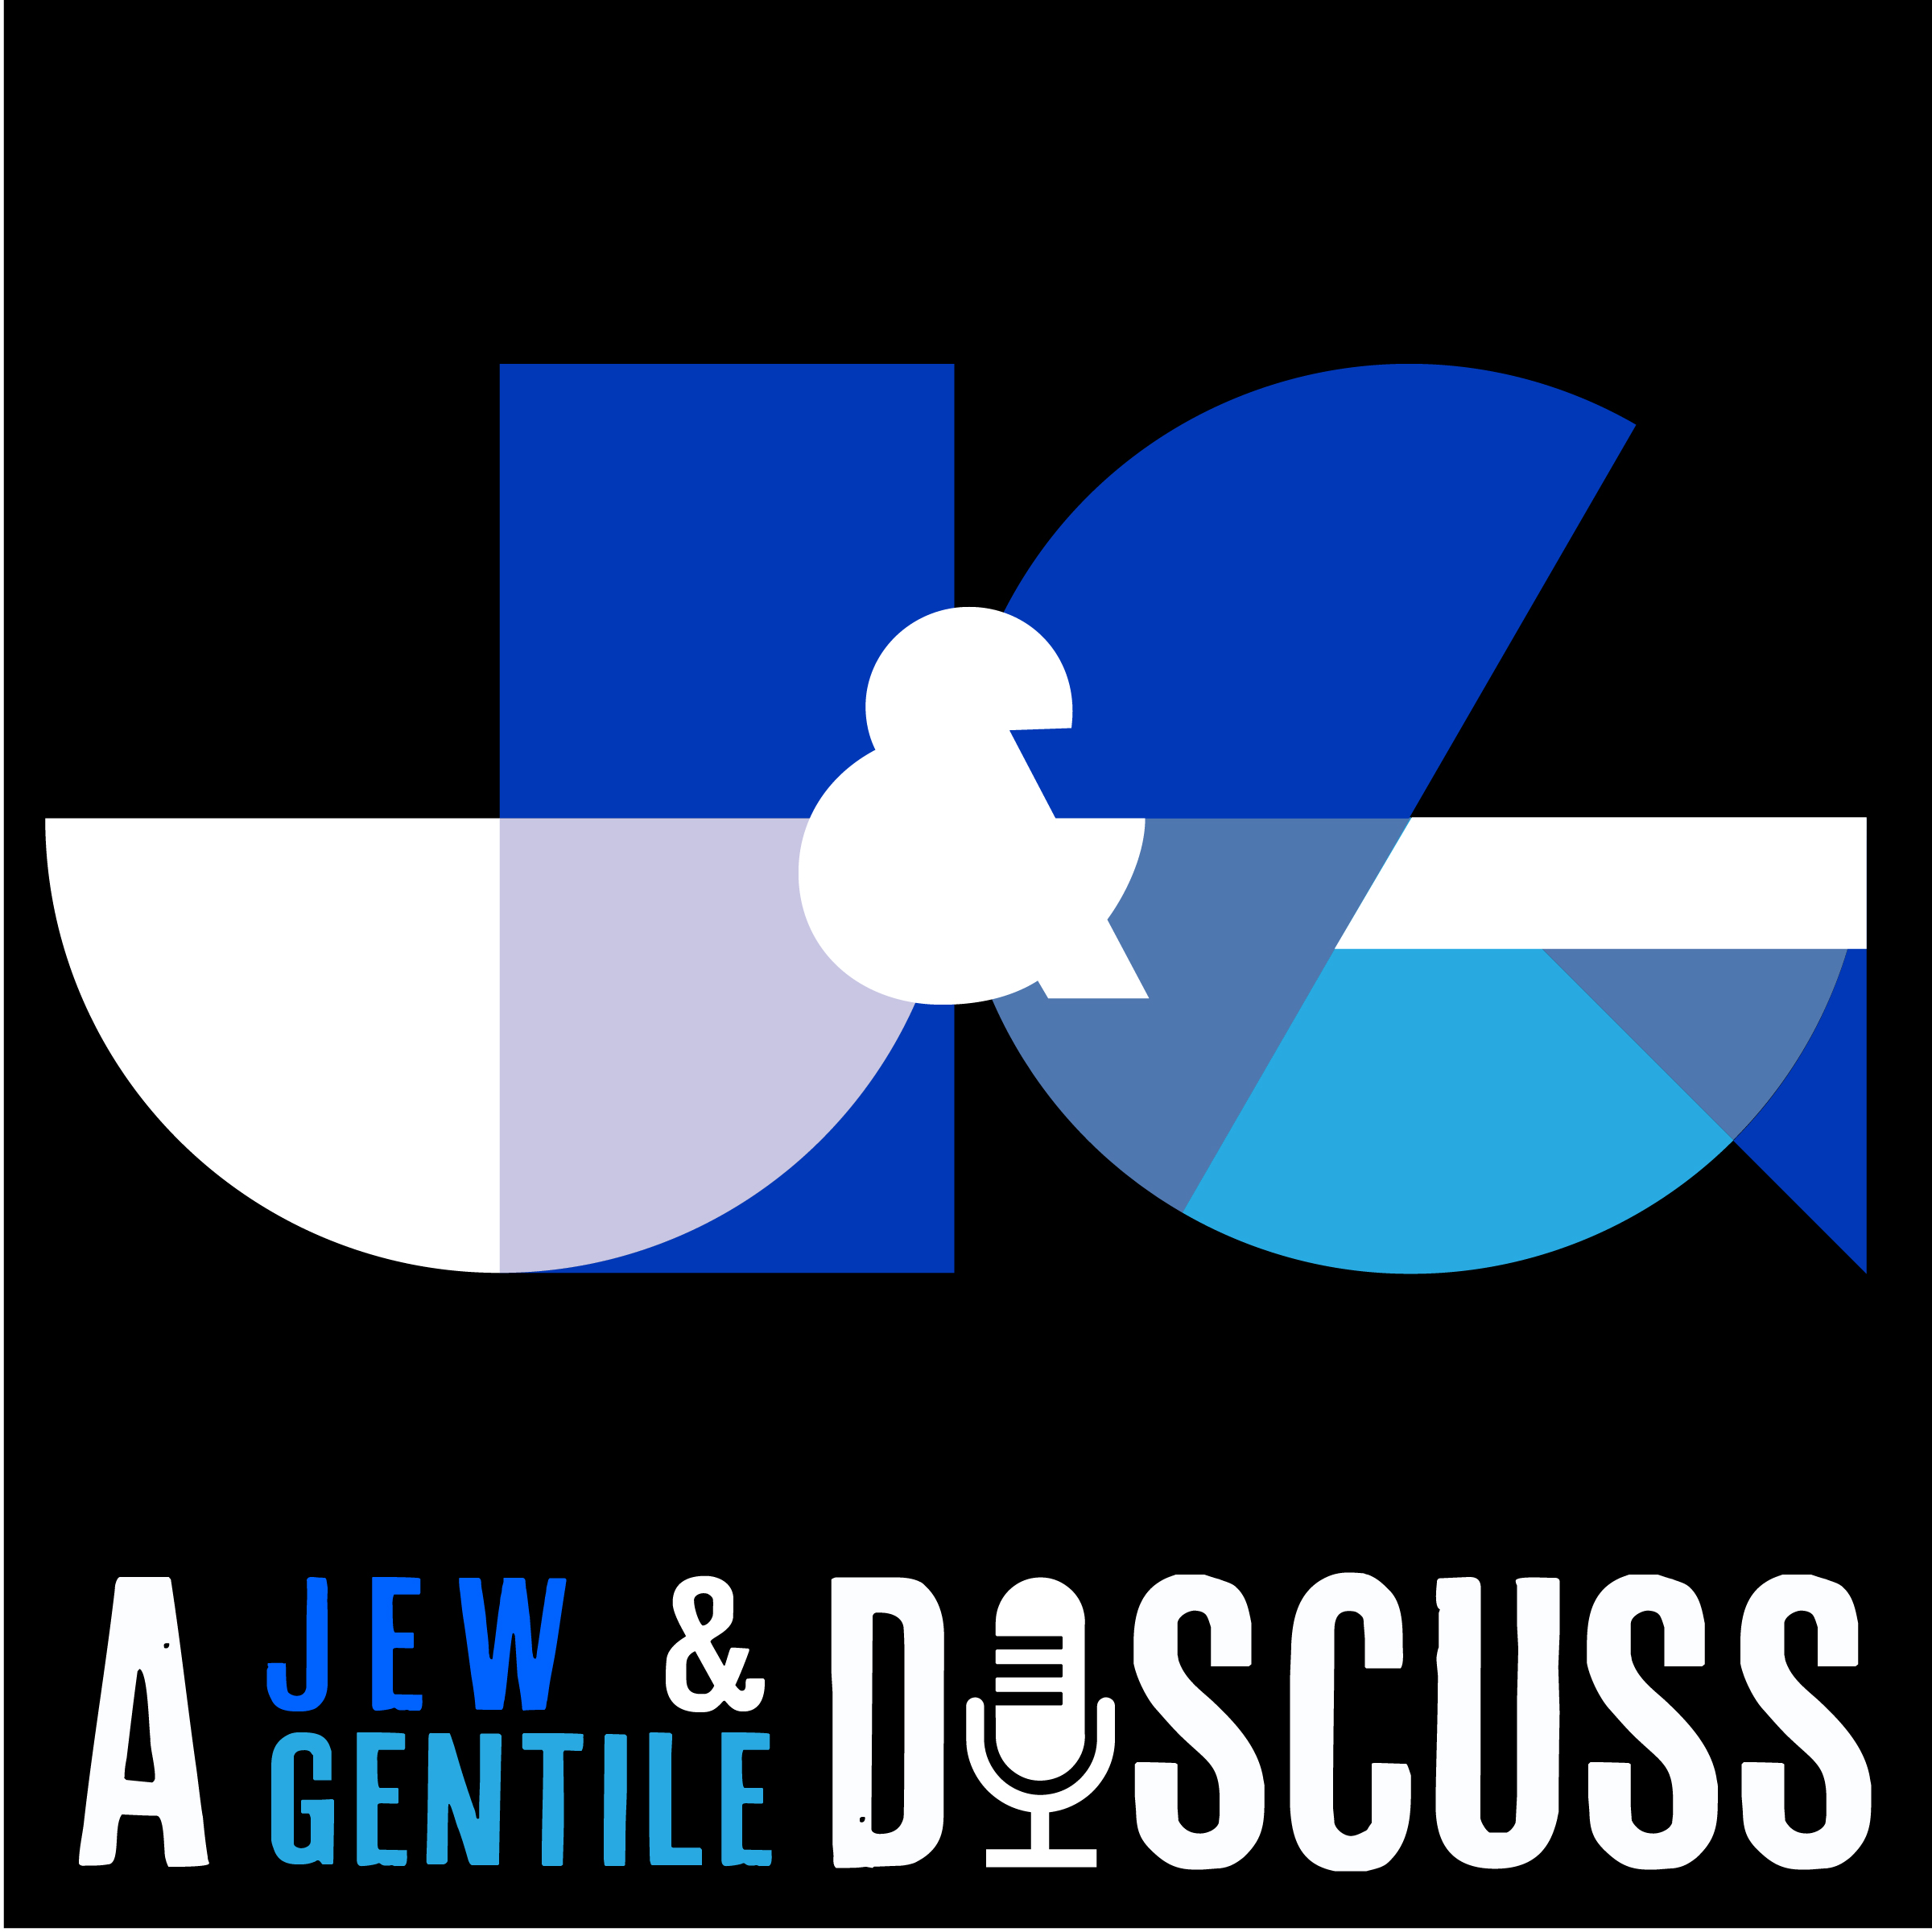 S3 EP4 | "But He Doesn’t Look Jewish"